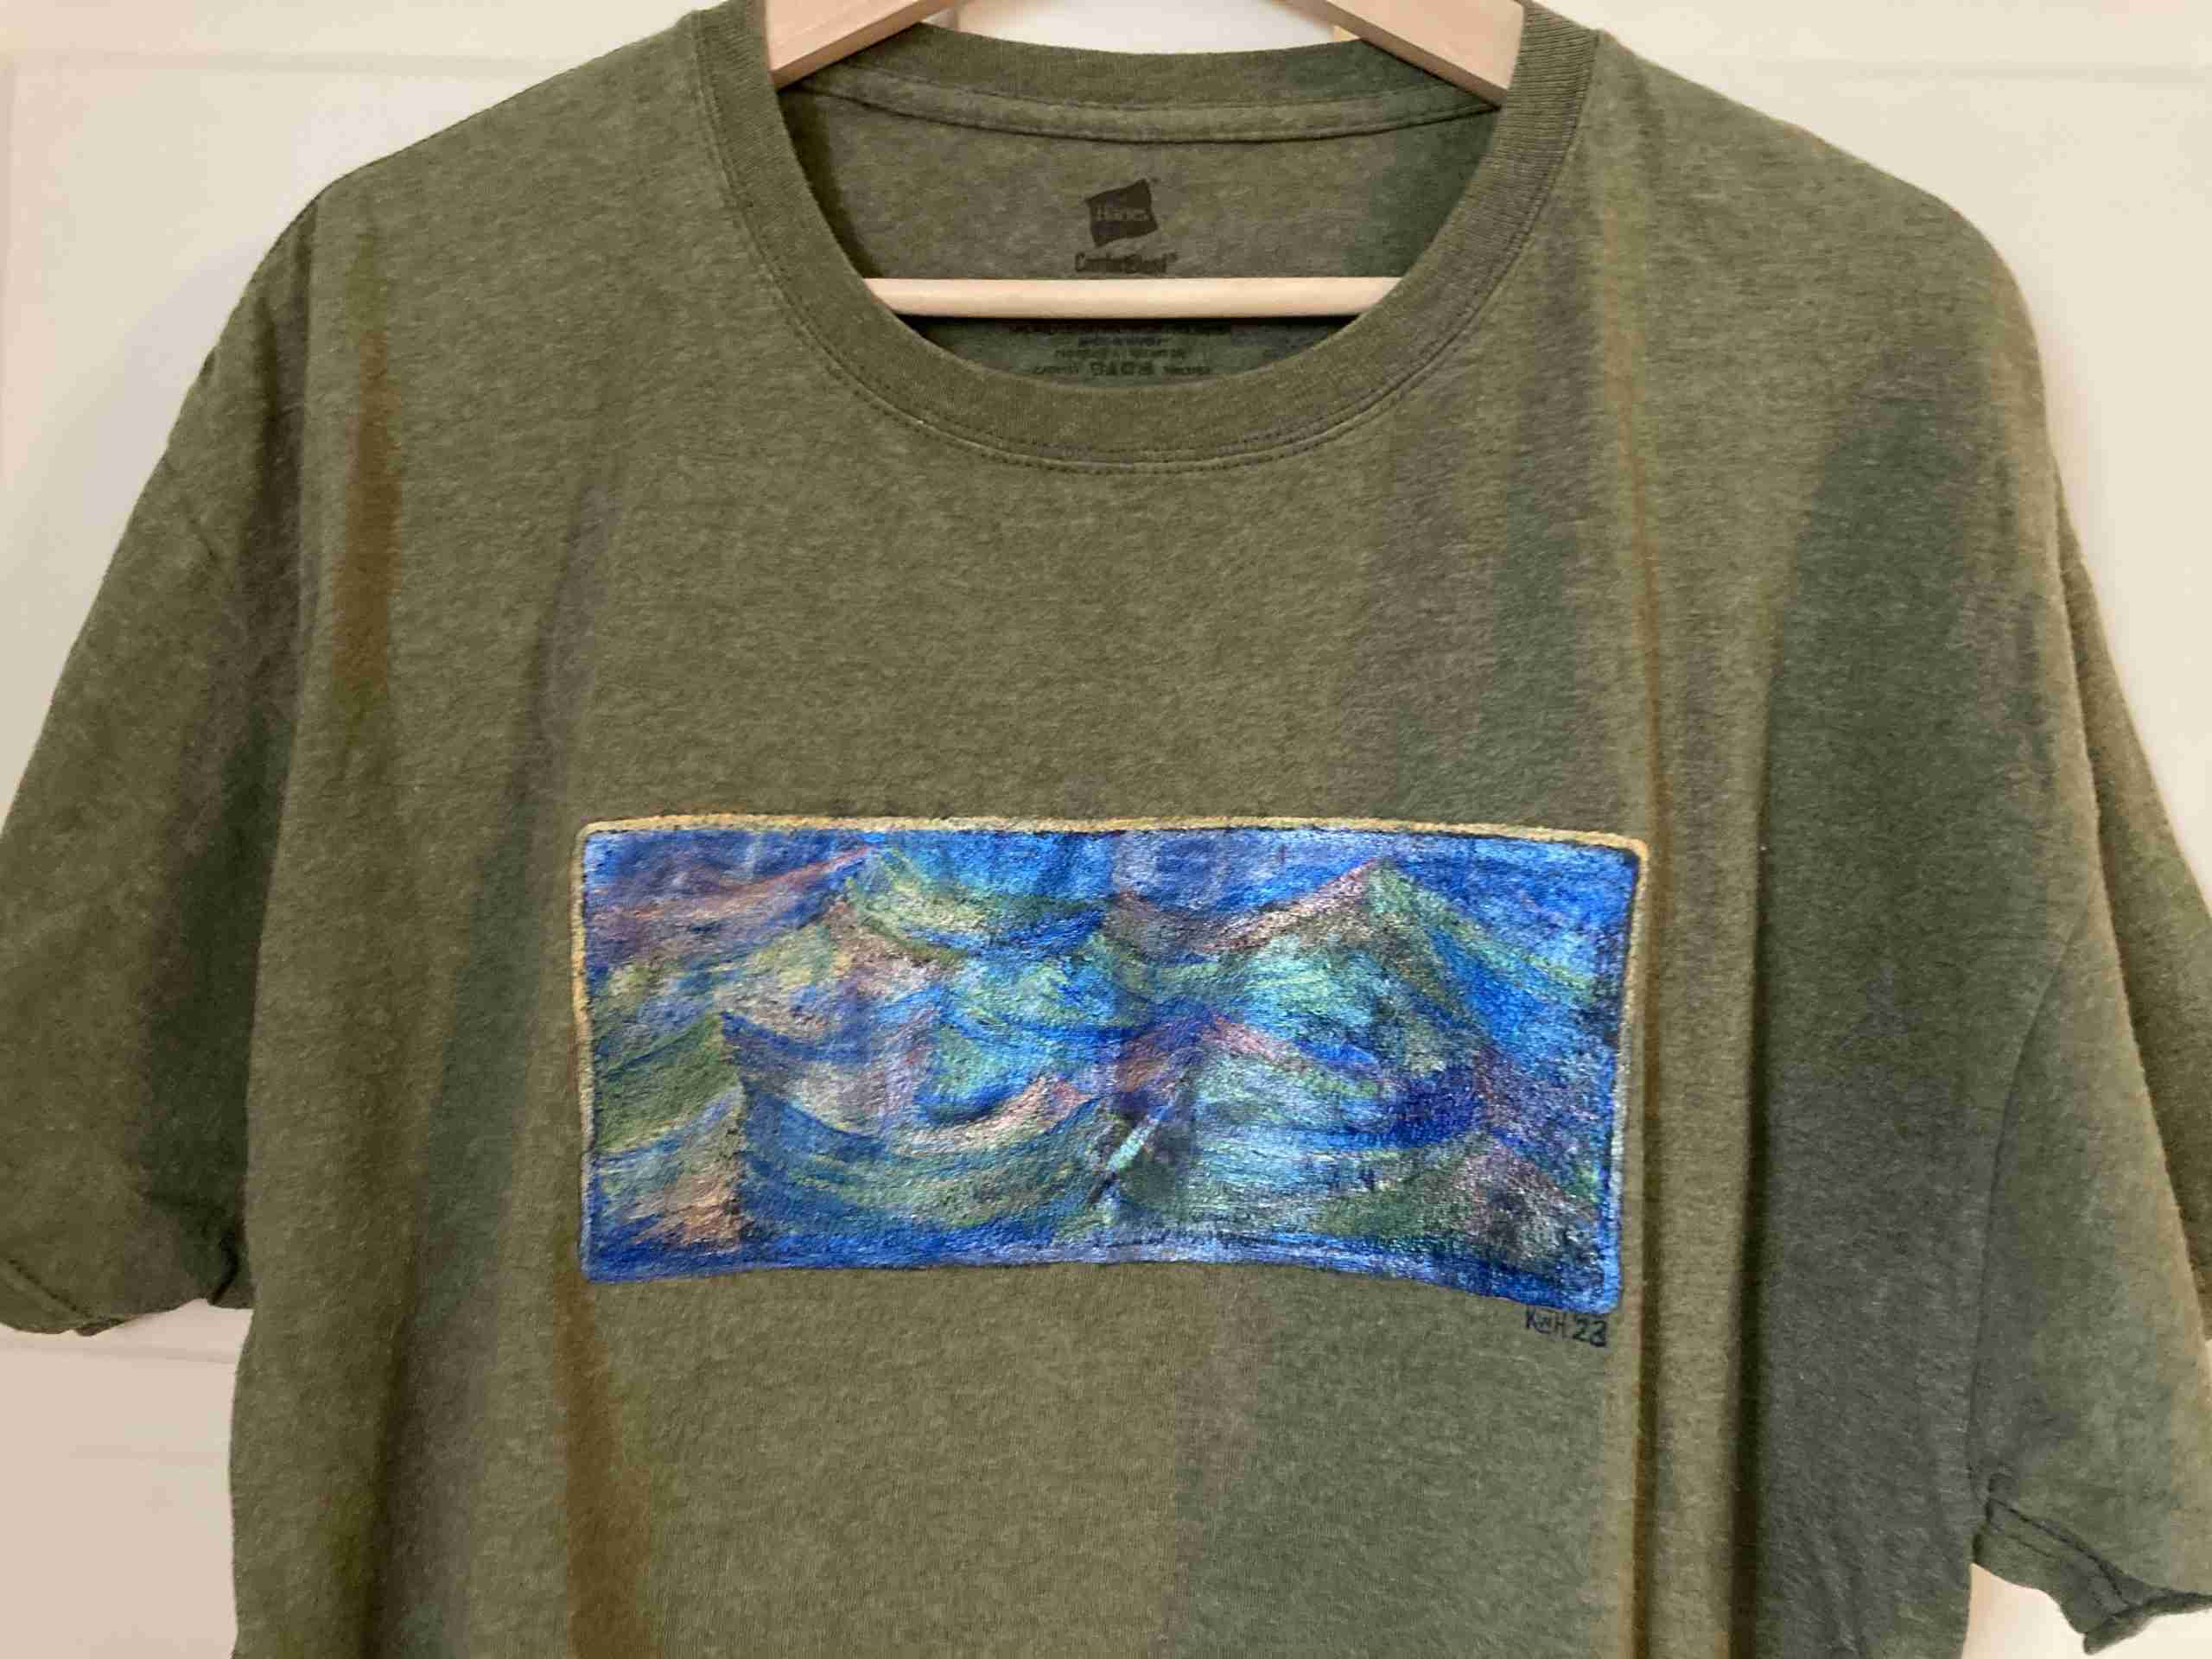 a green t - shirt with a painting on it.